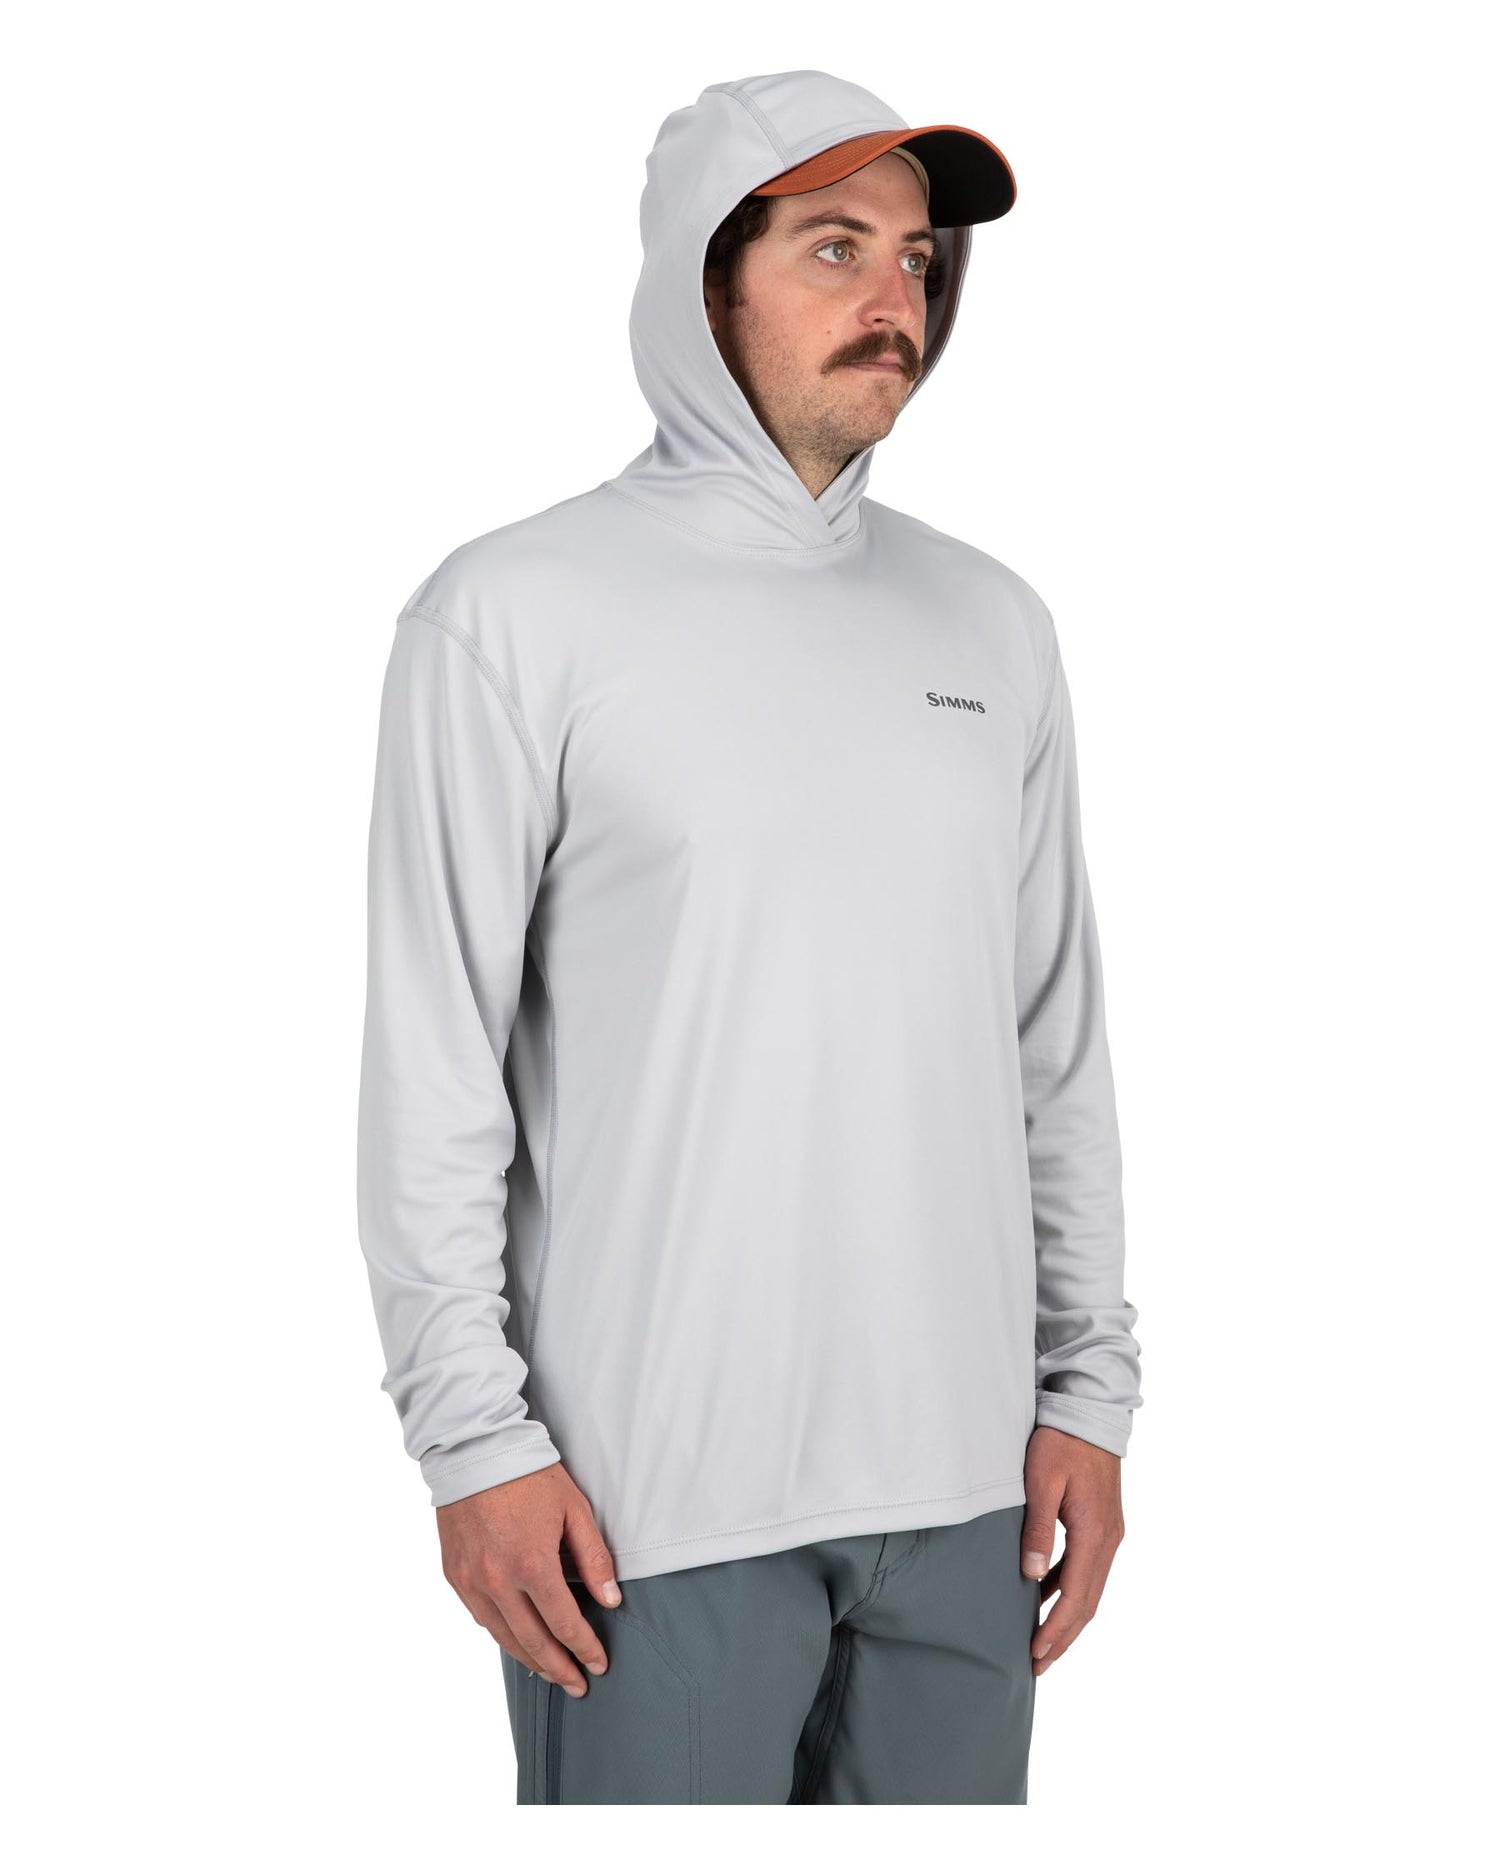 Simms Tech Hoody - Artist Series - Madison River Outfitters